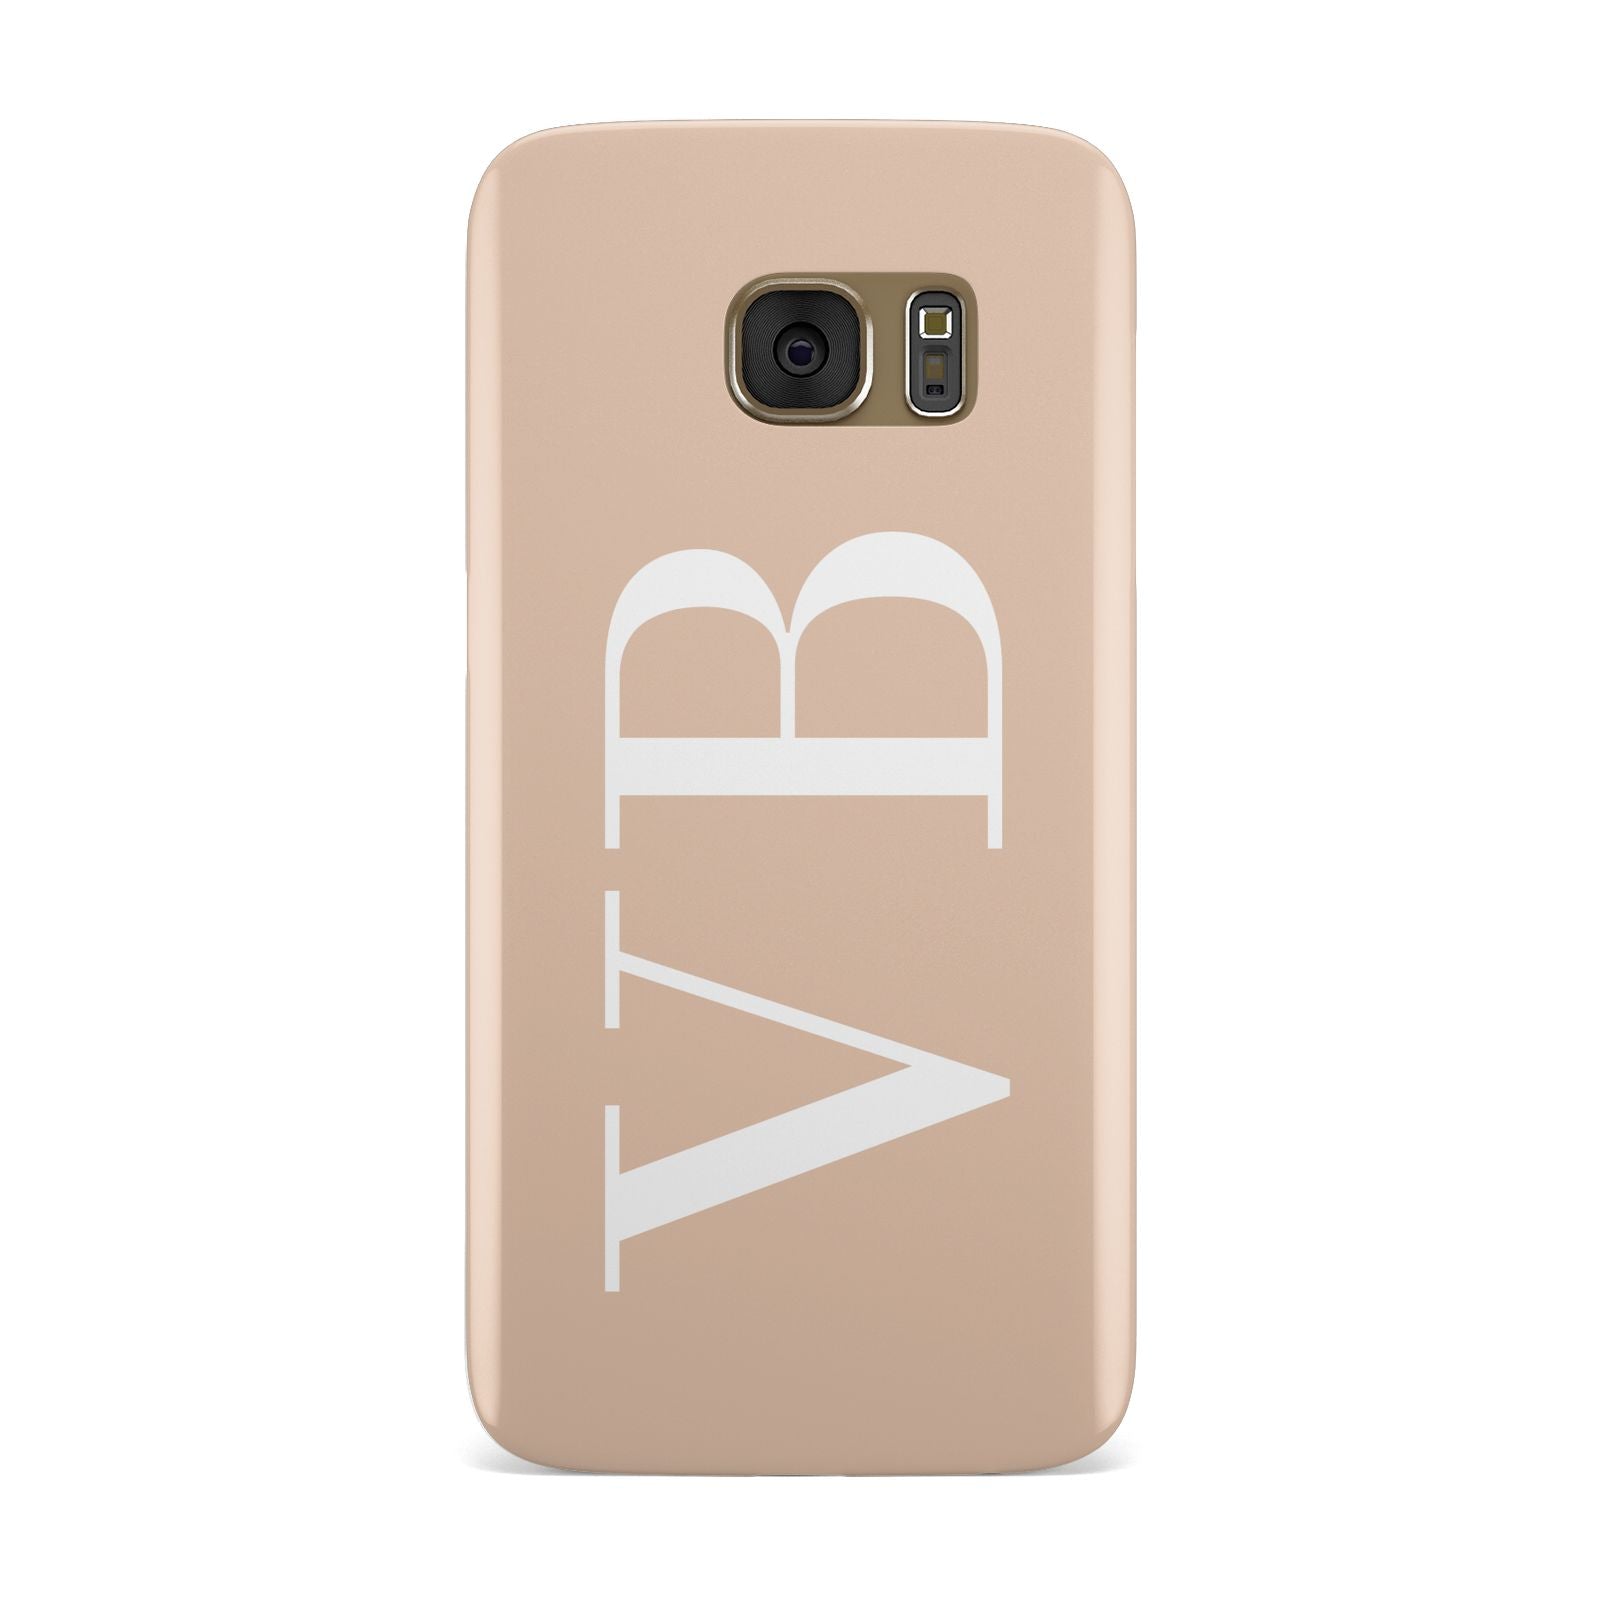 Nude And White Personalised Samsung Galaxy Case